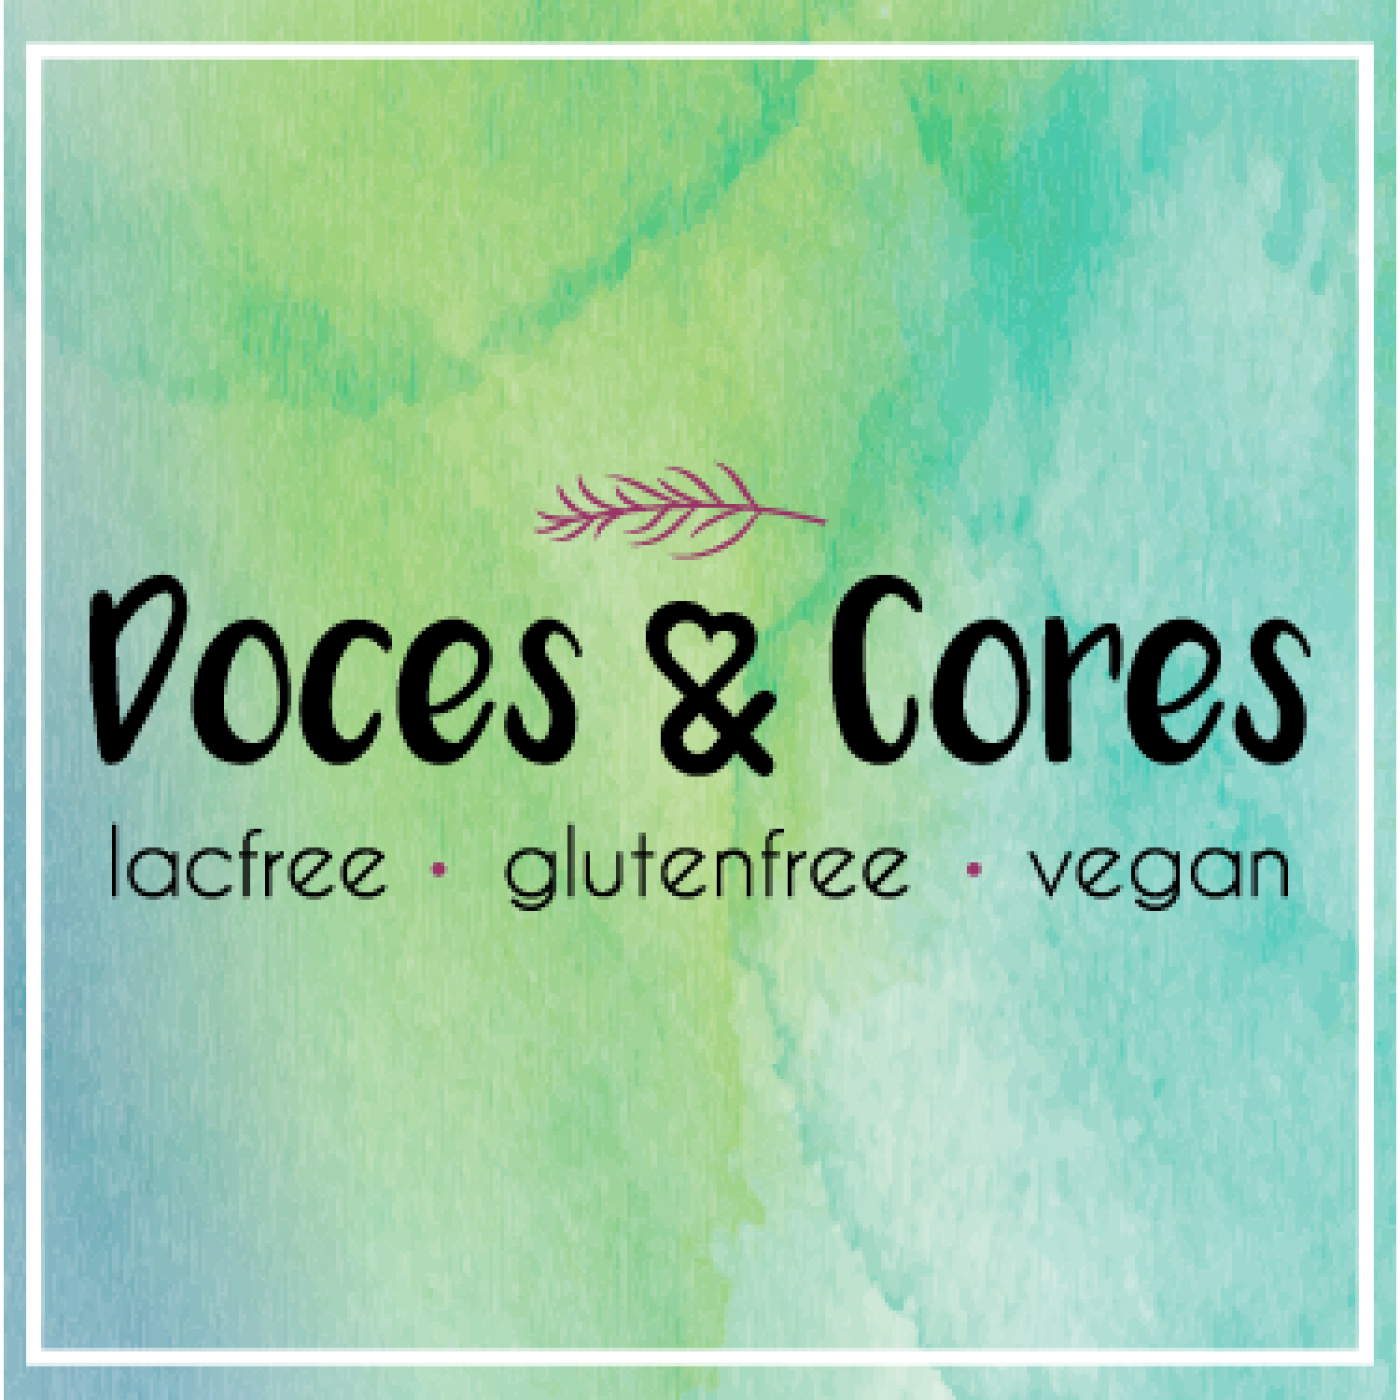 Doces & Cores